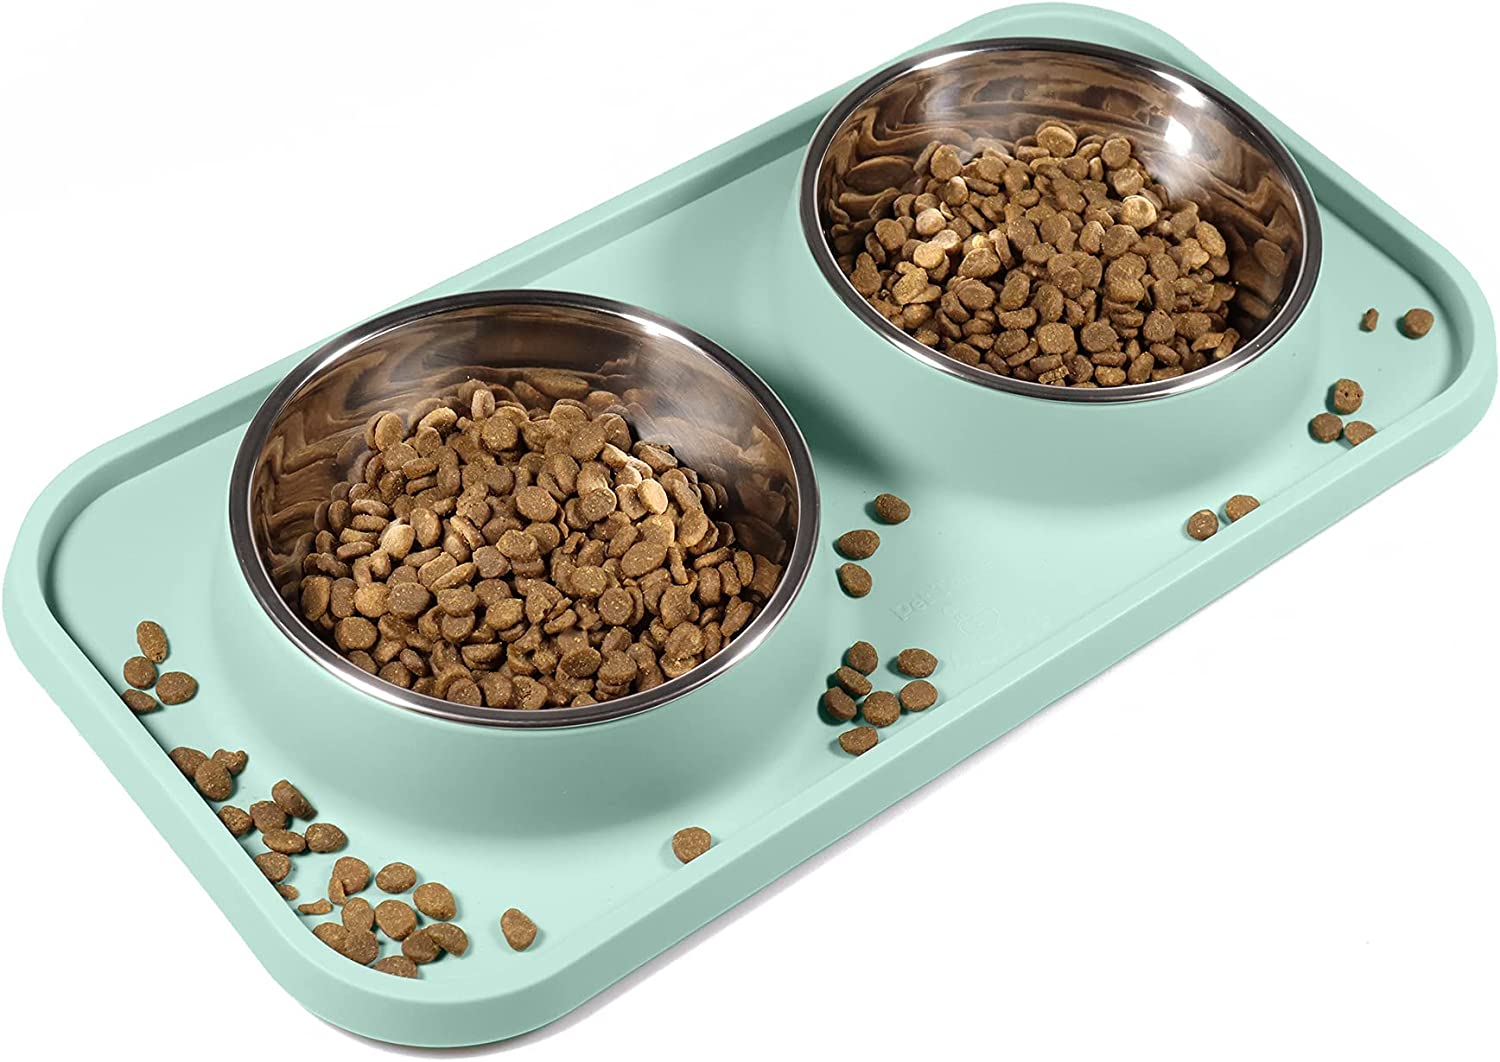 L.d.dog cat food bowls, cat bowls non-skid and non-spill silicone mats with stand, removable stainless steel food and water dishes for cats, small size dogs